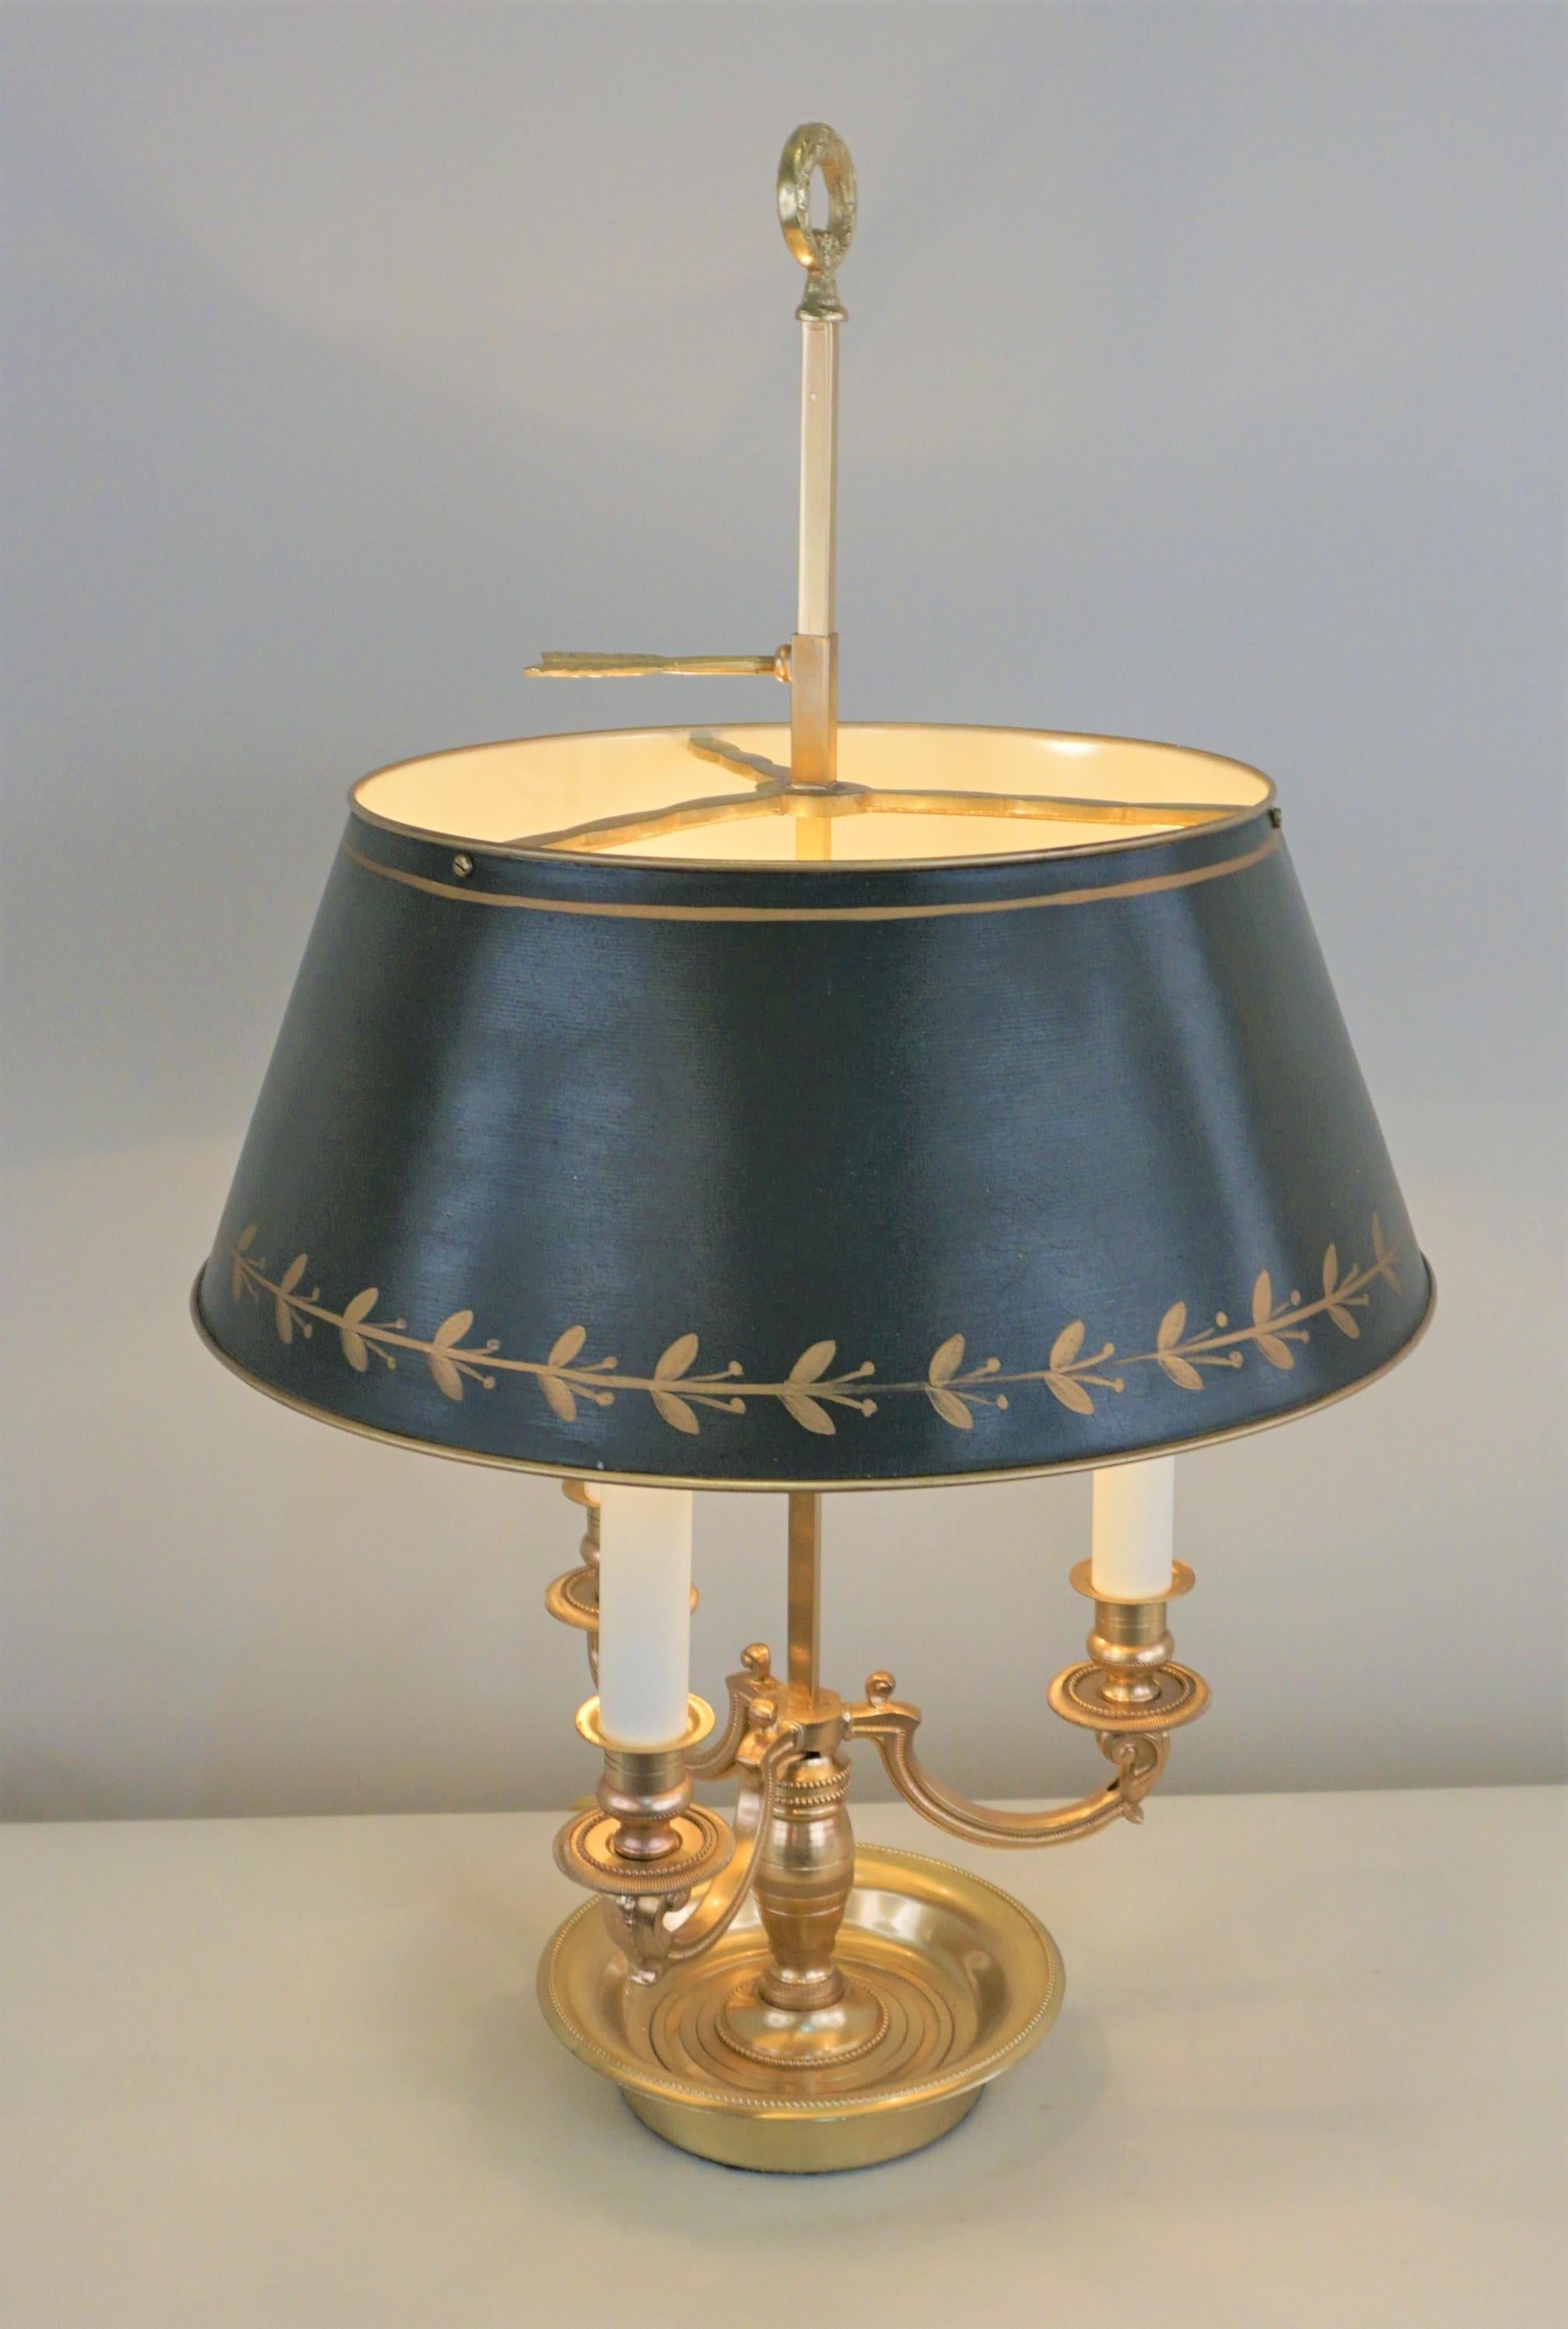 French 1930s Empire style bronze desk or table lamp with adjustable dark green metal shade.